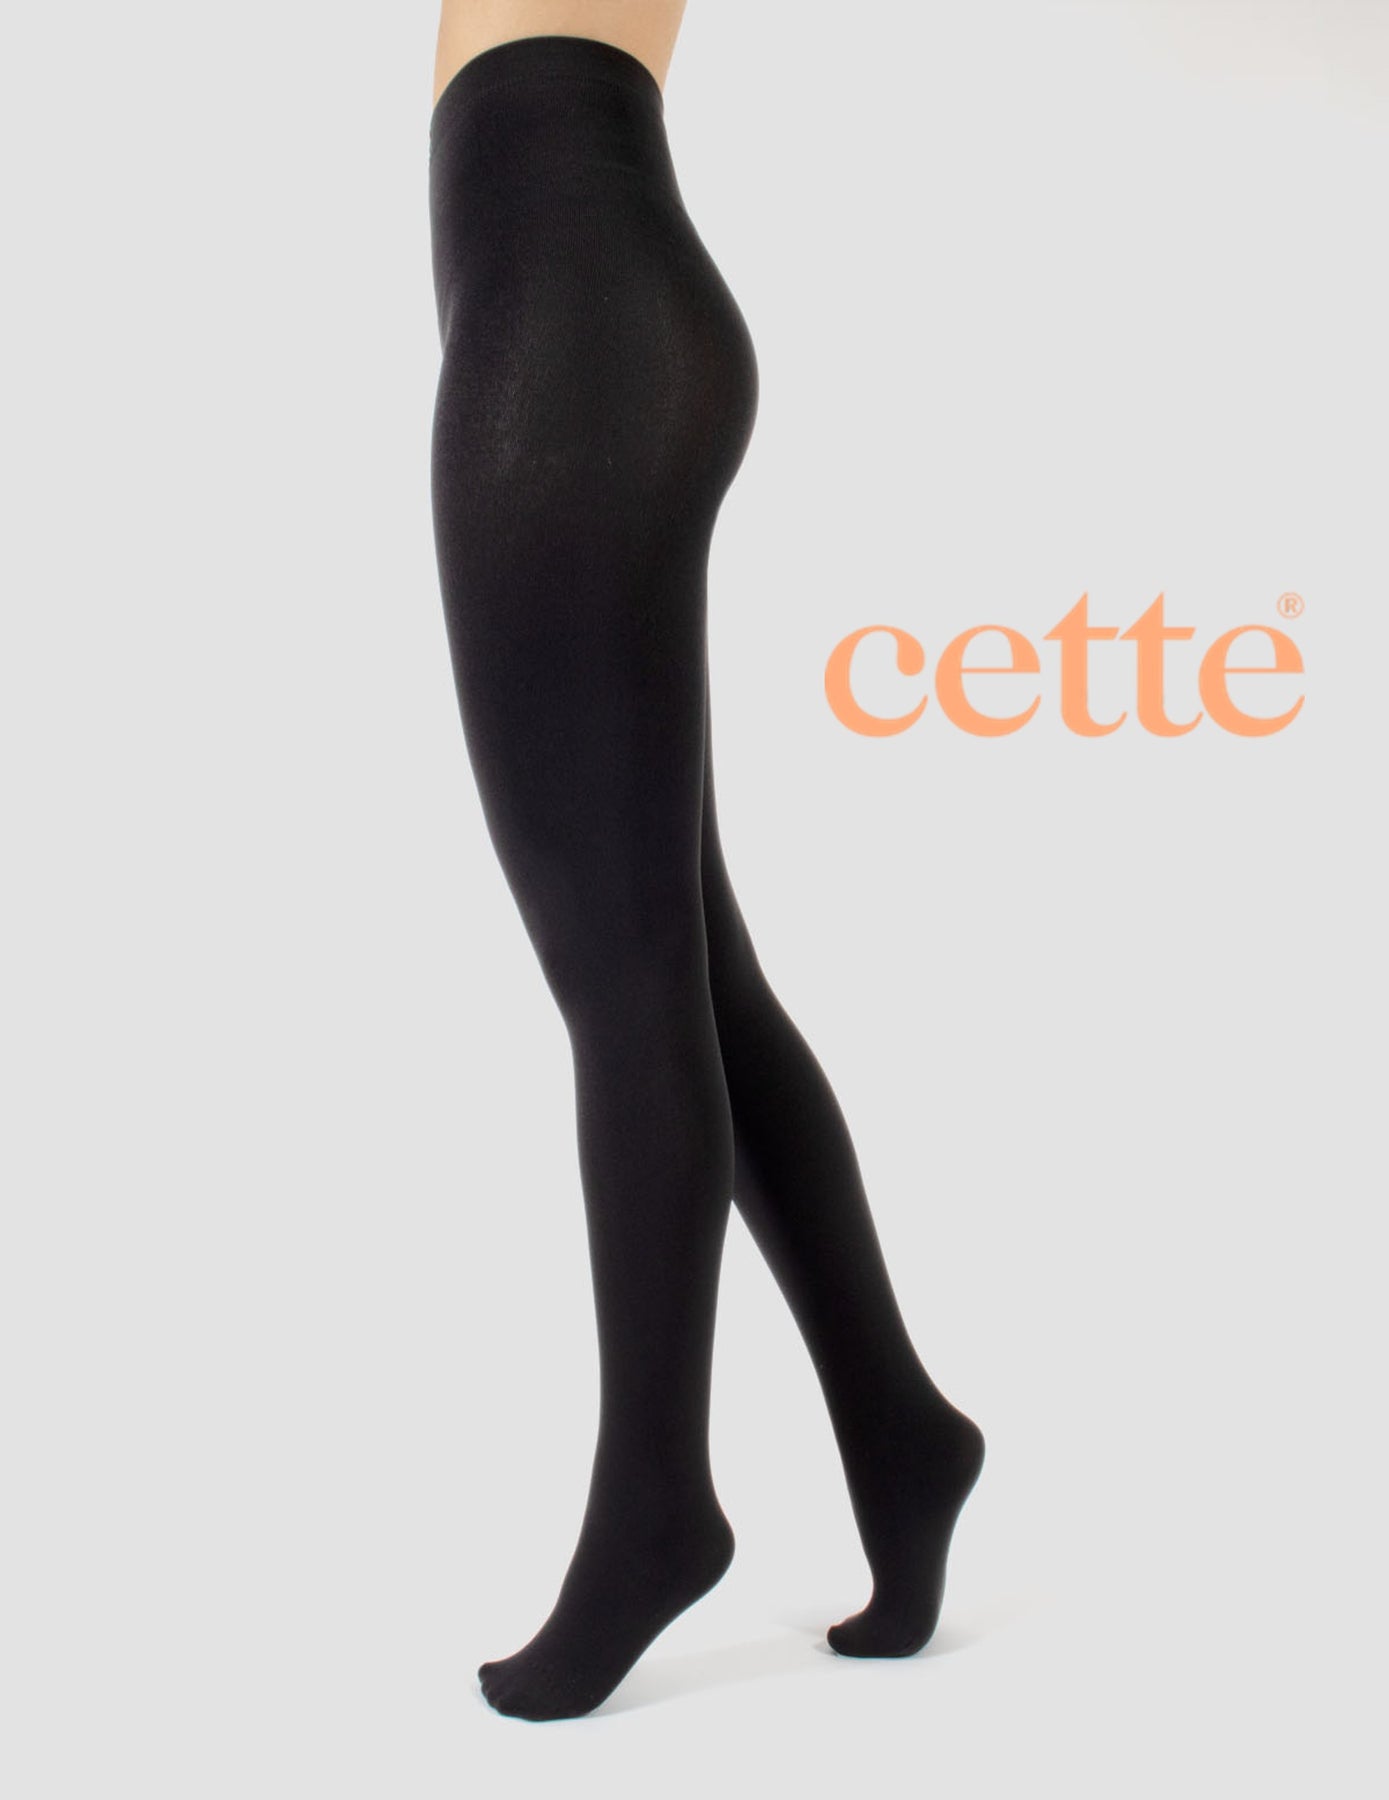 Cette Thermal Tights 300 Denier – Starts With Legs